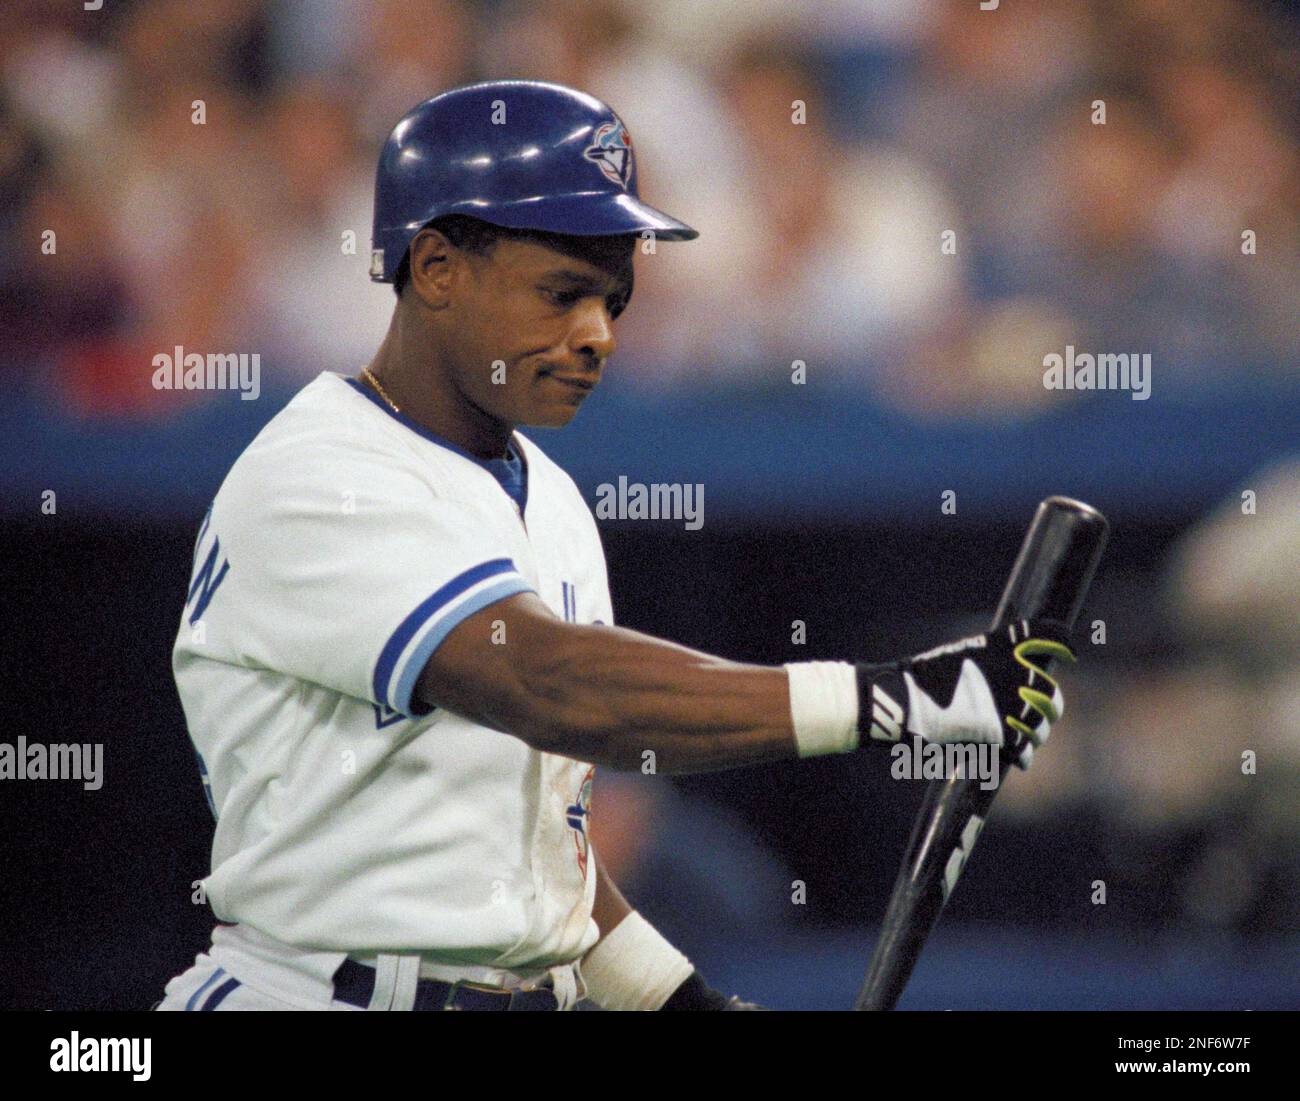 A dejected Toronto Blue Jays' Rickey Henderson reacts after a strikeout in  the fifth inning in Game 3 of the American League Playoffs against the  Chicago White Sox, Friday, Oct. 8, 1993